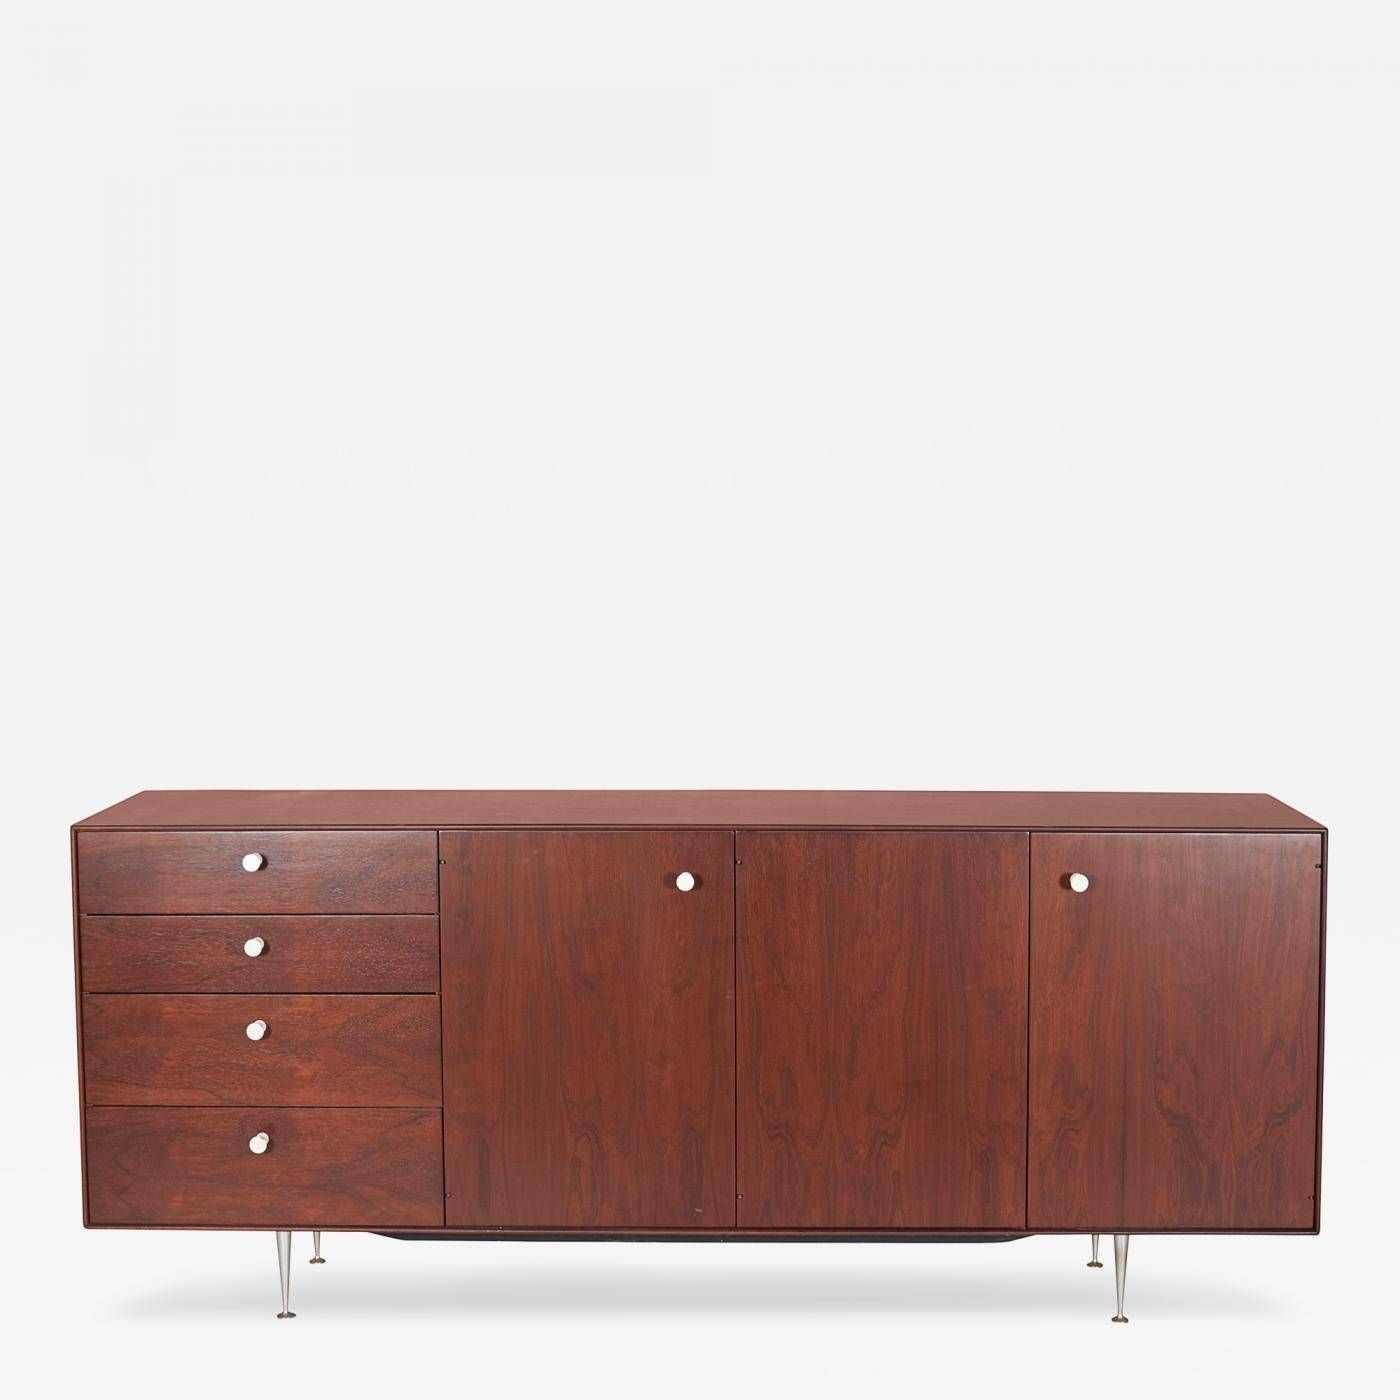 George Nelson – Rosewood Thin Edge Sideboard Or Cabinet Inside Thin Sideboard (View 14 of 20)